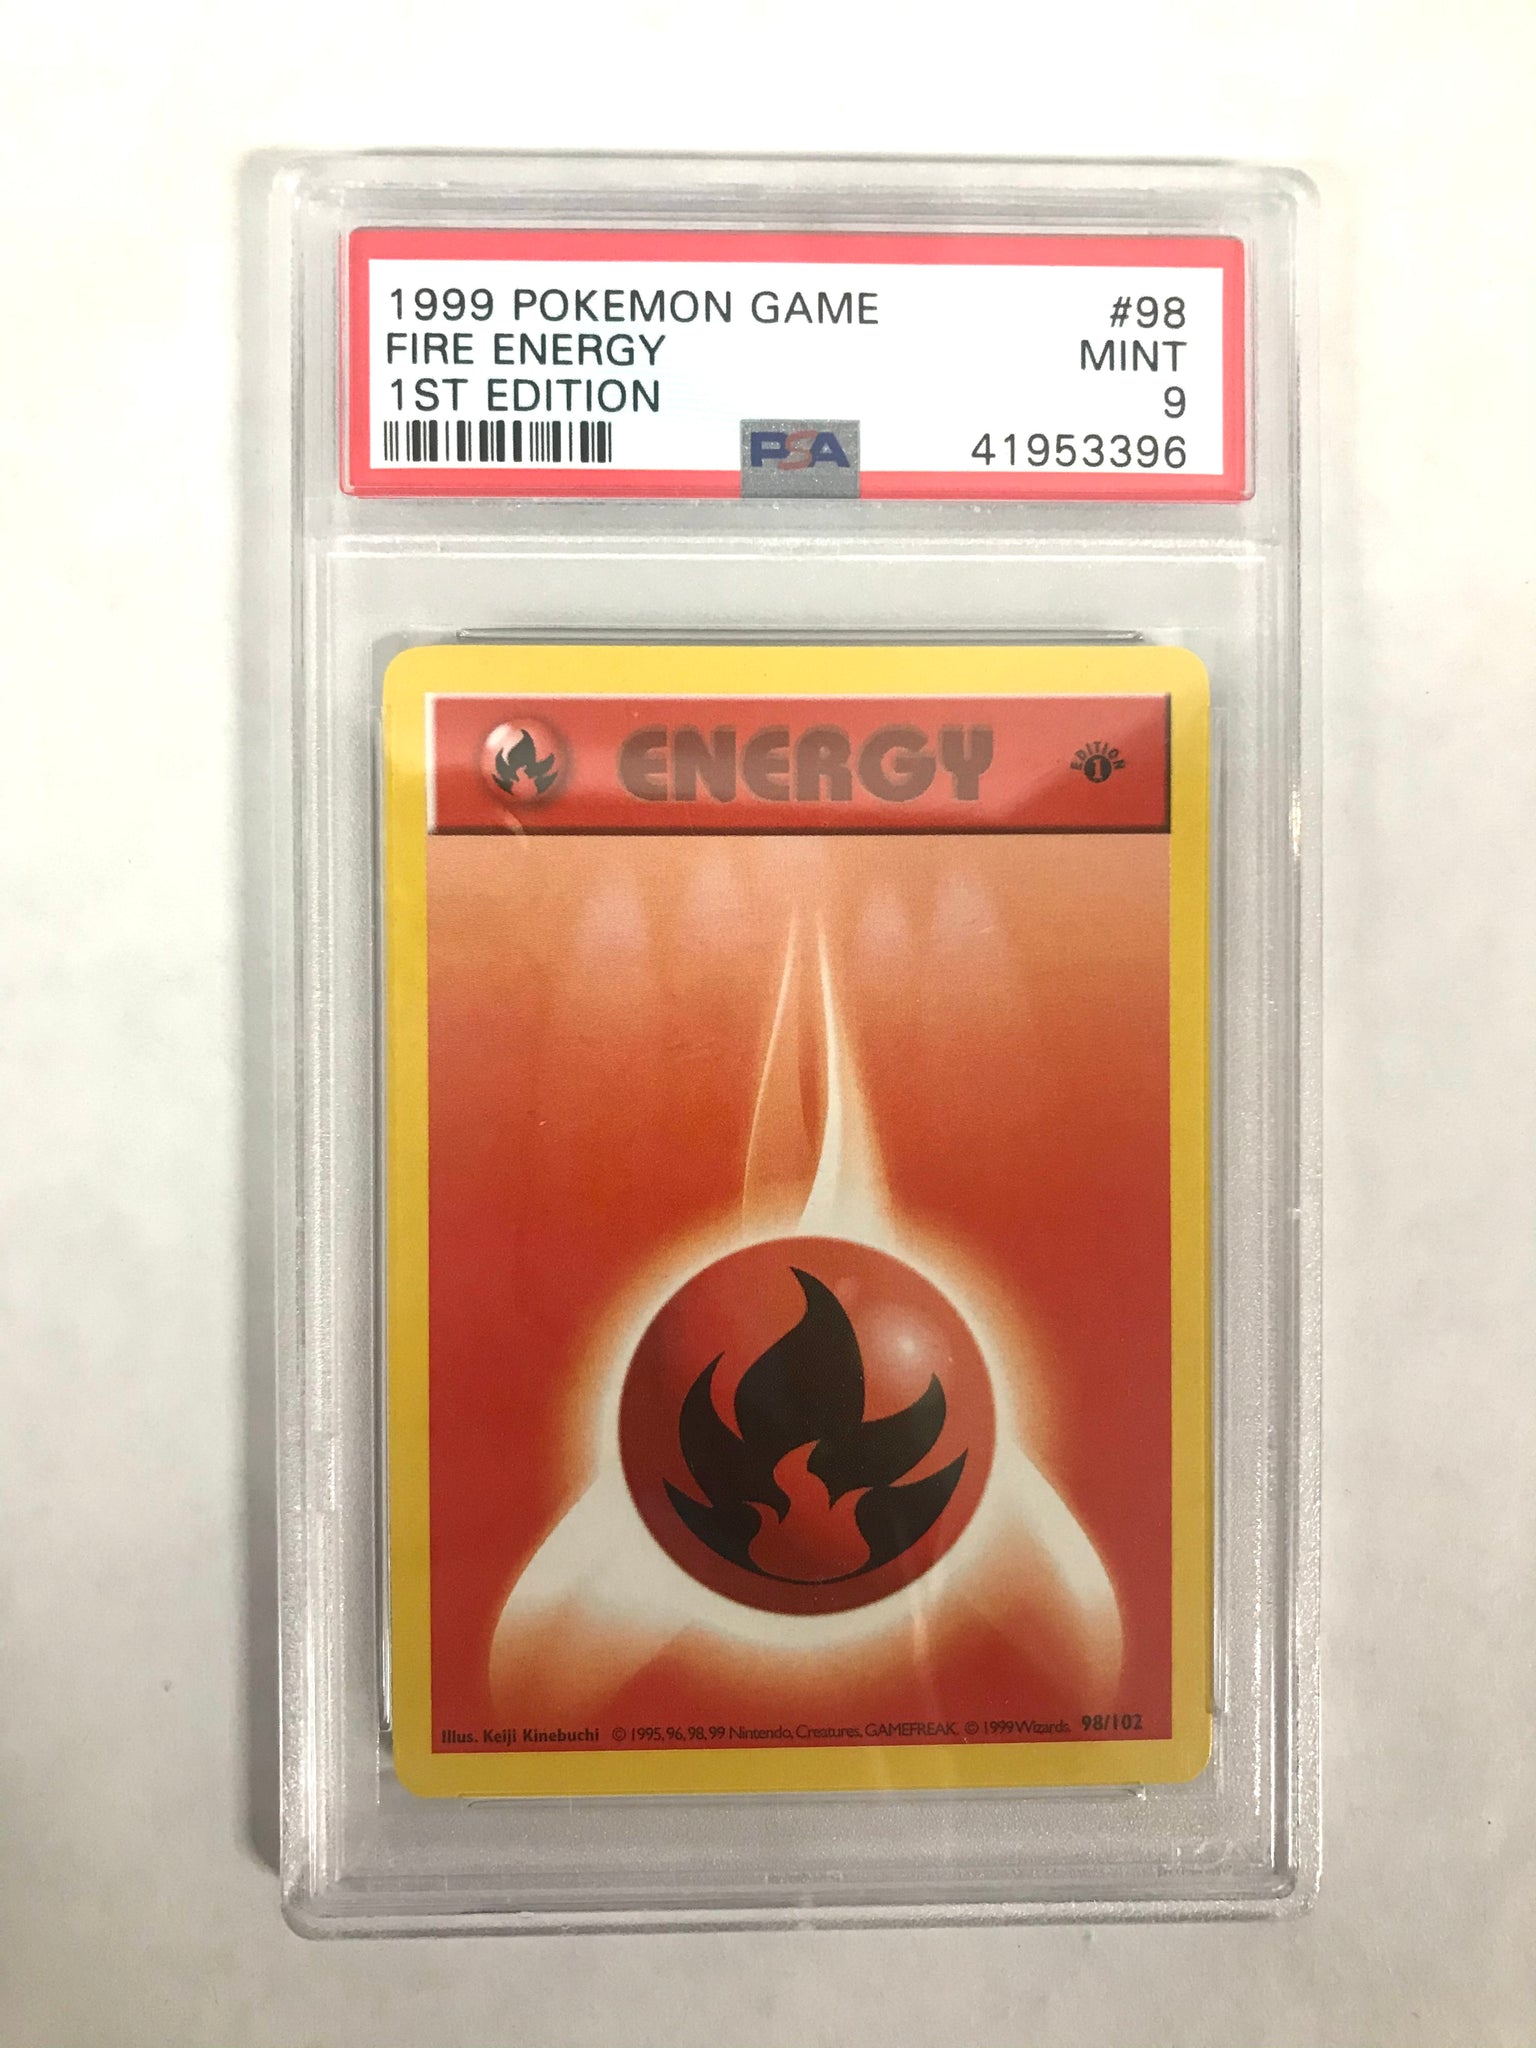 pokemon-1999-fire-energy-1st-edition-psa-graded-cards-and-comics-central